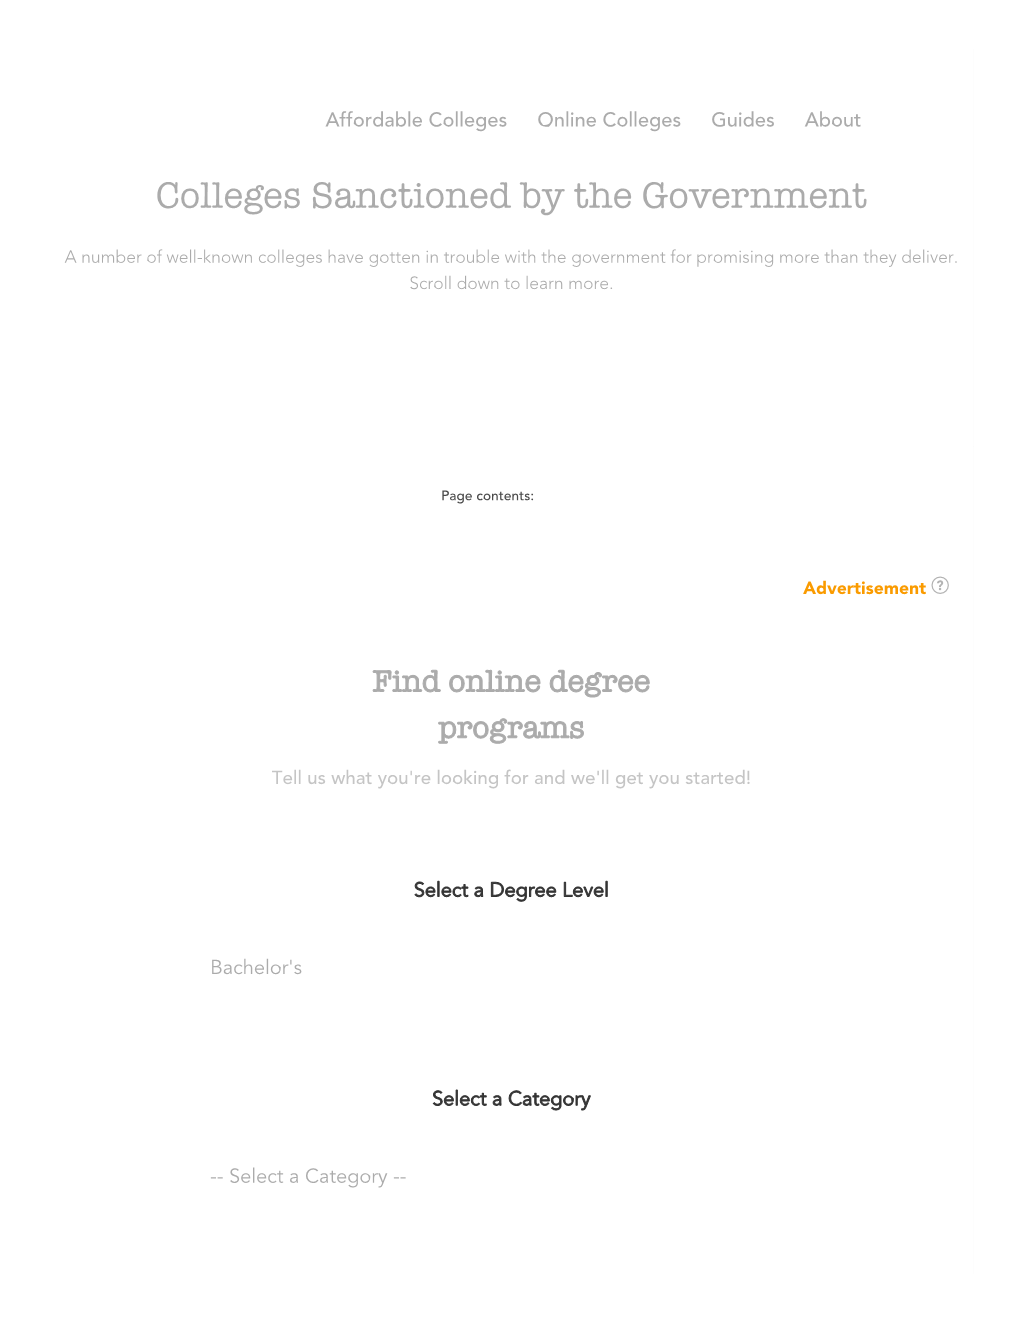 College Affordability Guide, Colleges Sanctioned by the Government